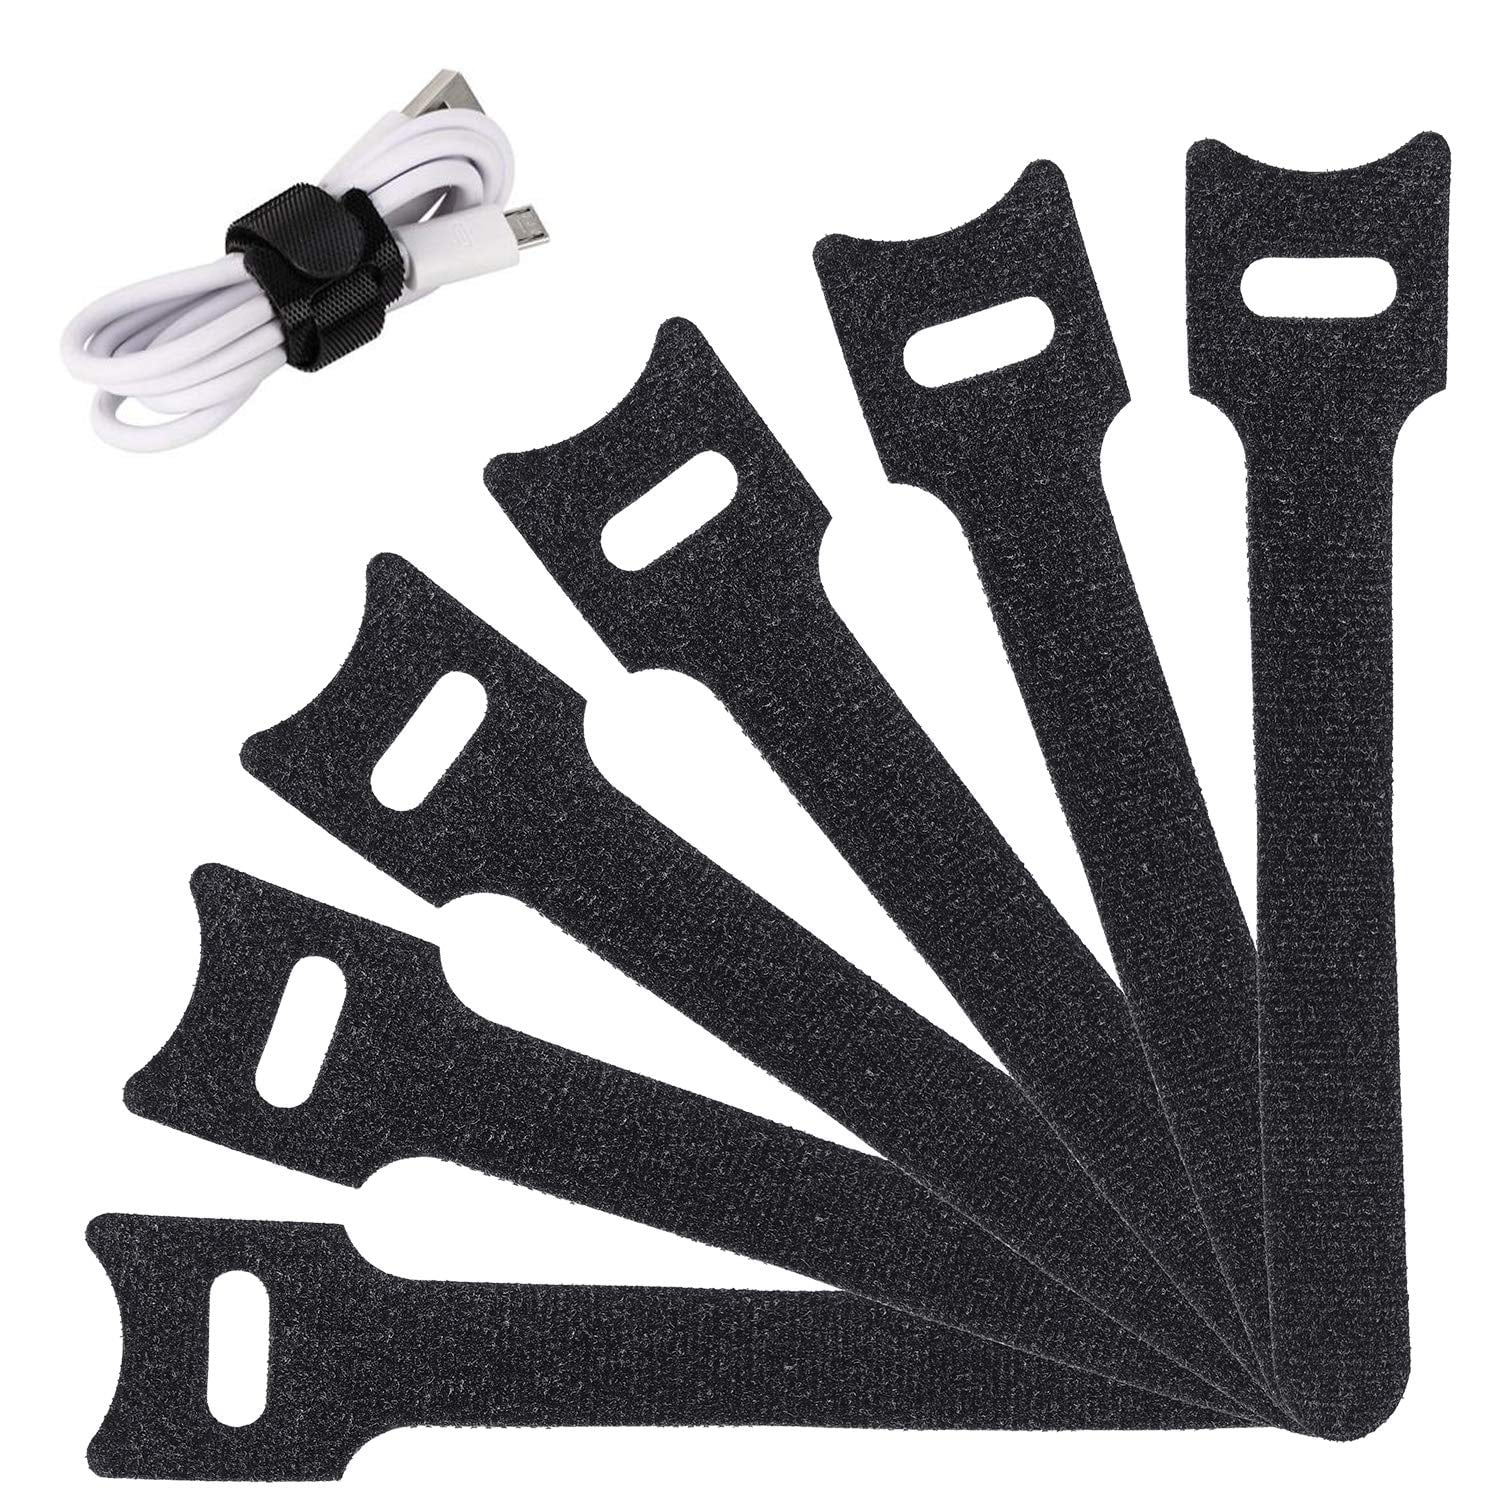 10 Pack Hook and Loop Reusable Fastening Cable Tie Down Straps Adjustable Sizes Hook and Loop and Ties for Securing Items at Home Work and Outdoor